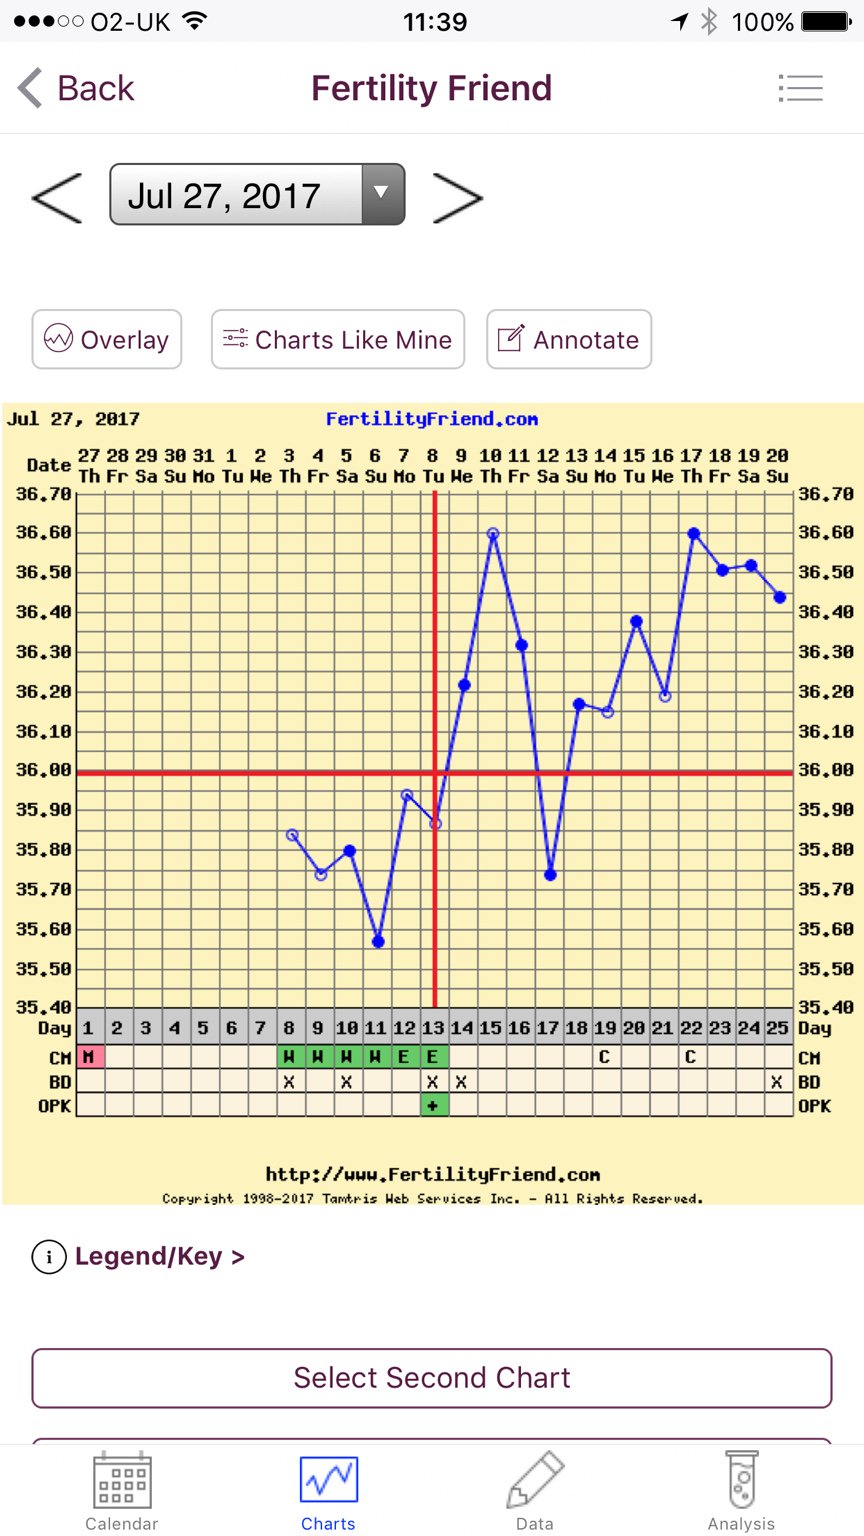 Does this look like a pregnancy bbt chart?